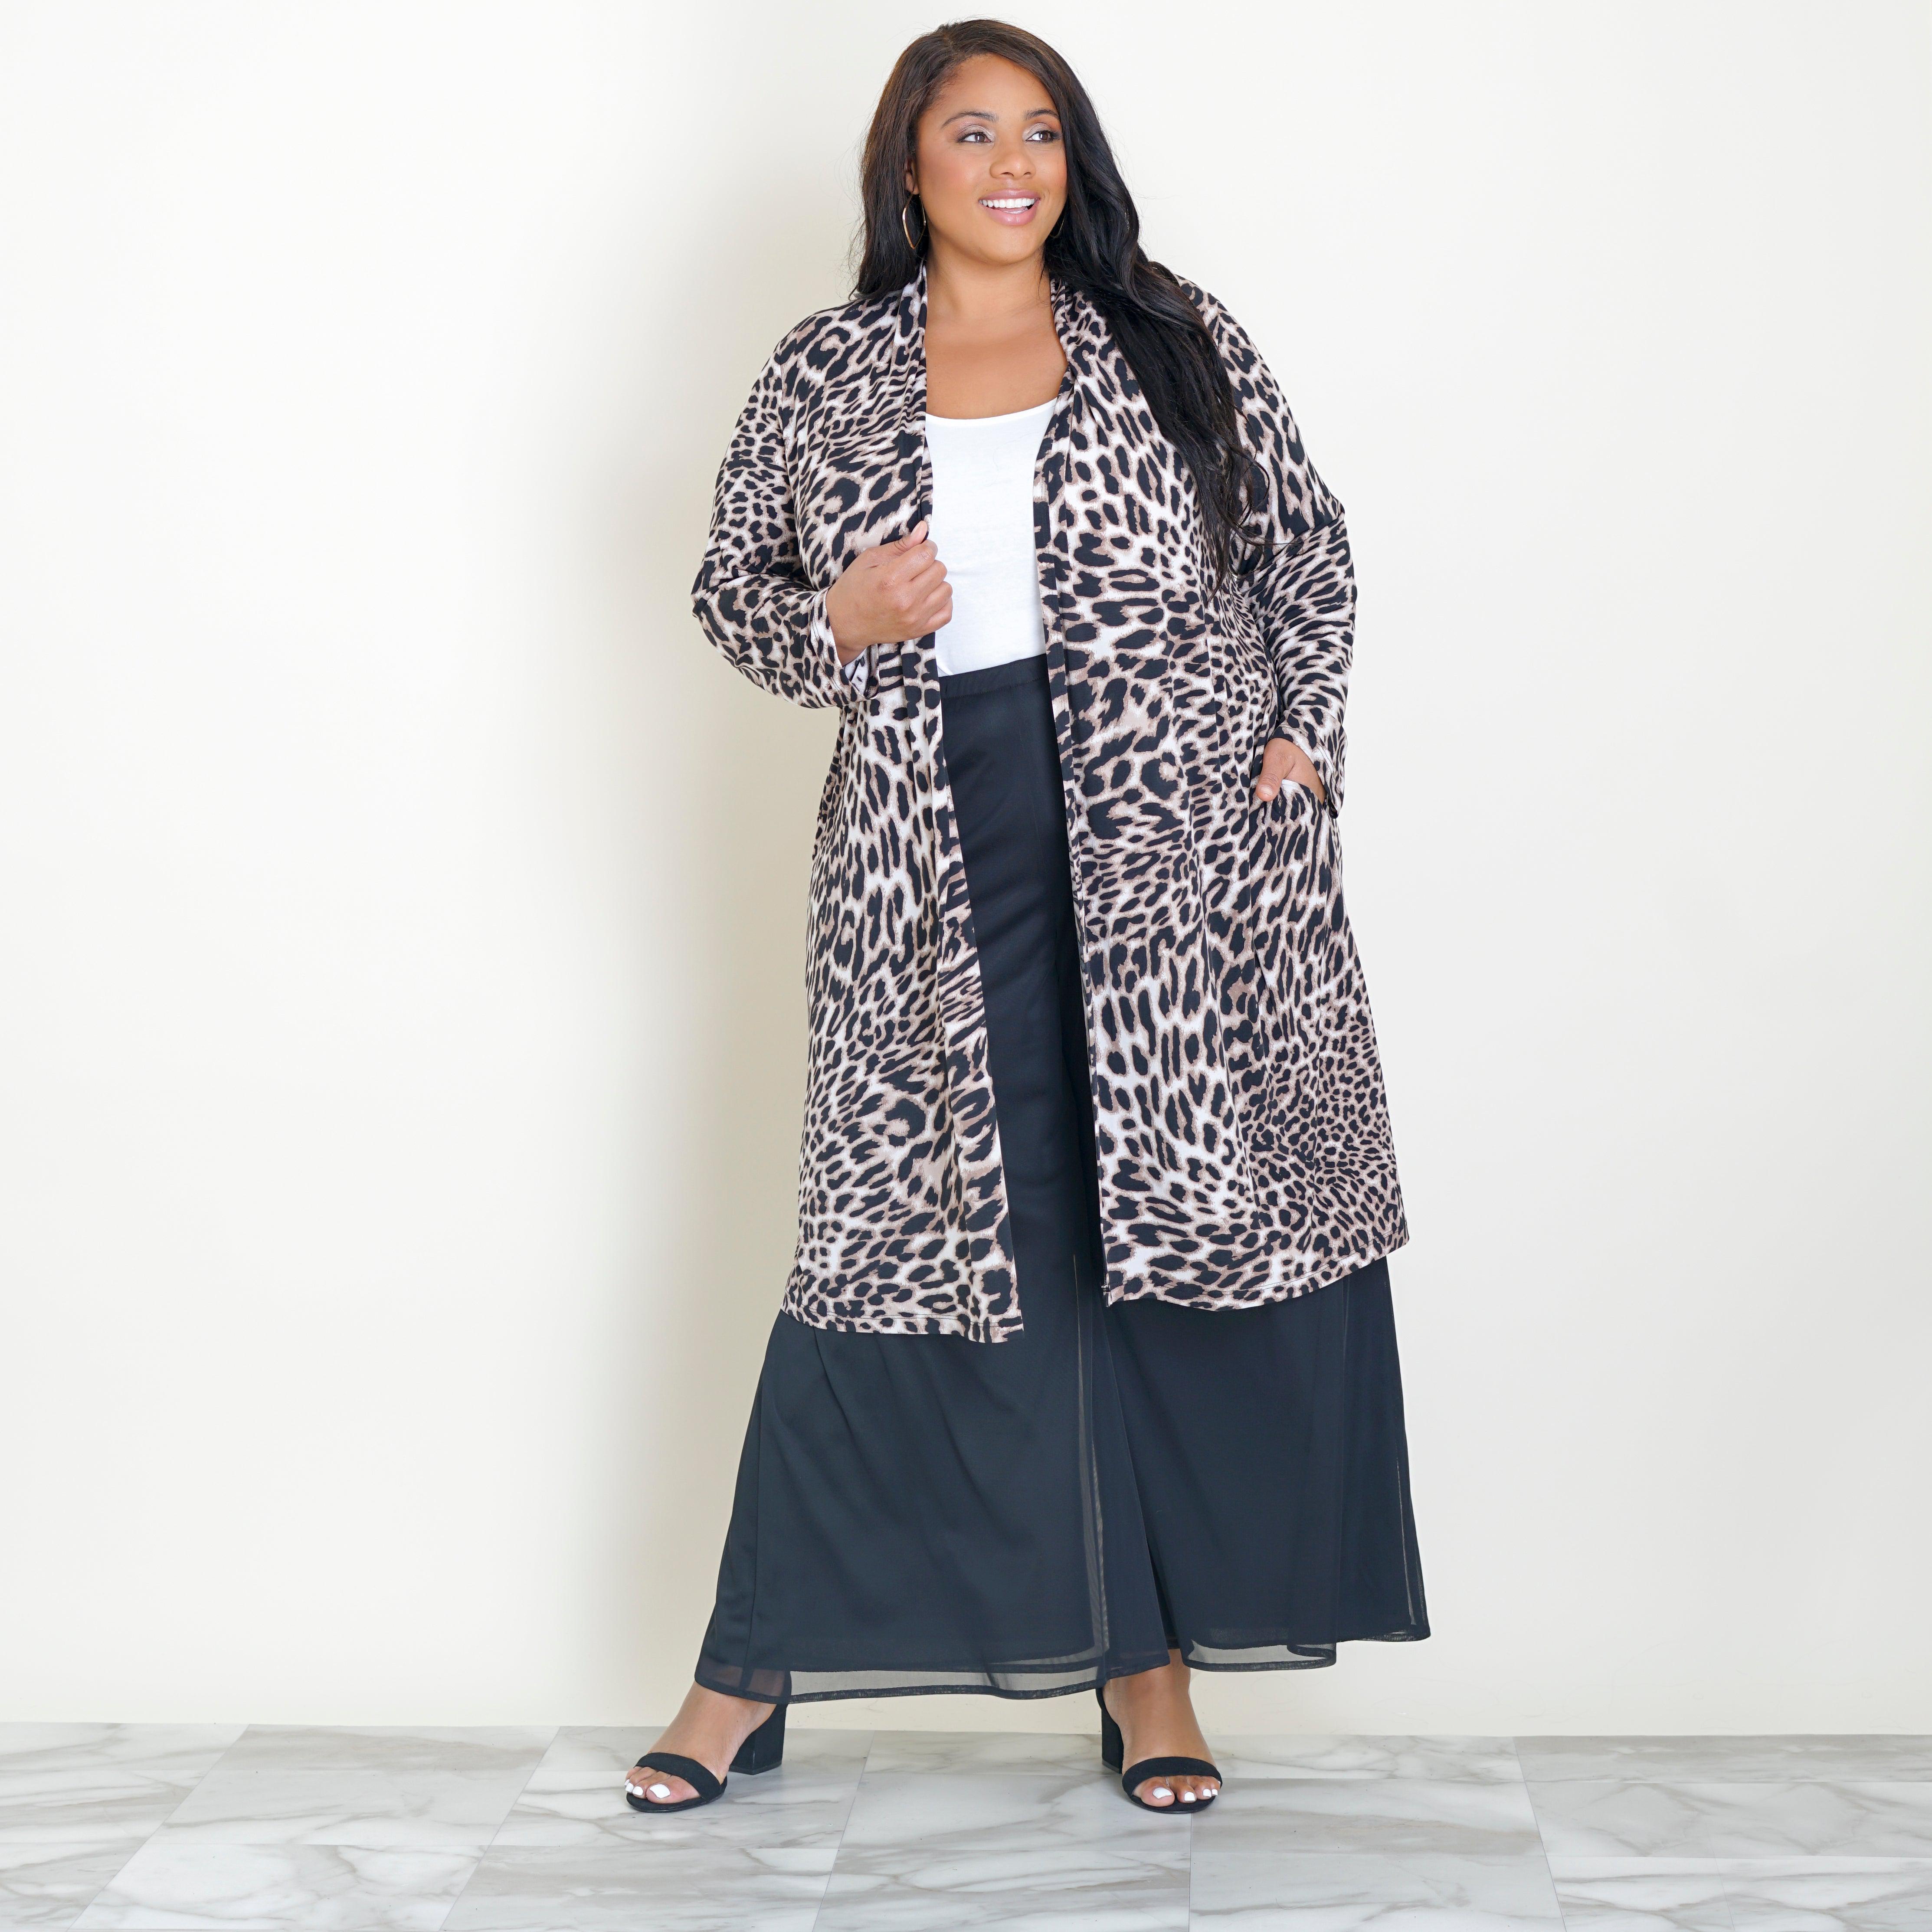 Woman posing wearing Black CAxLZ Bianca Leopard Print Cardigan from Connected Apparel